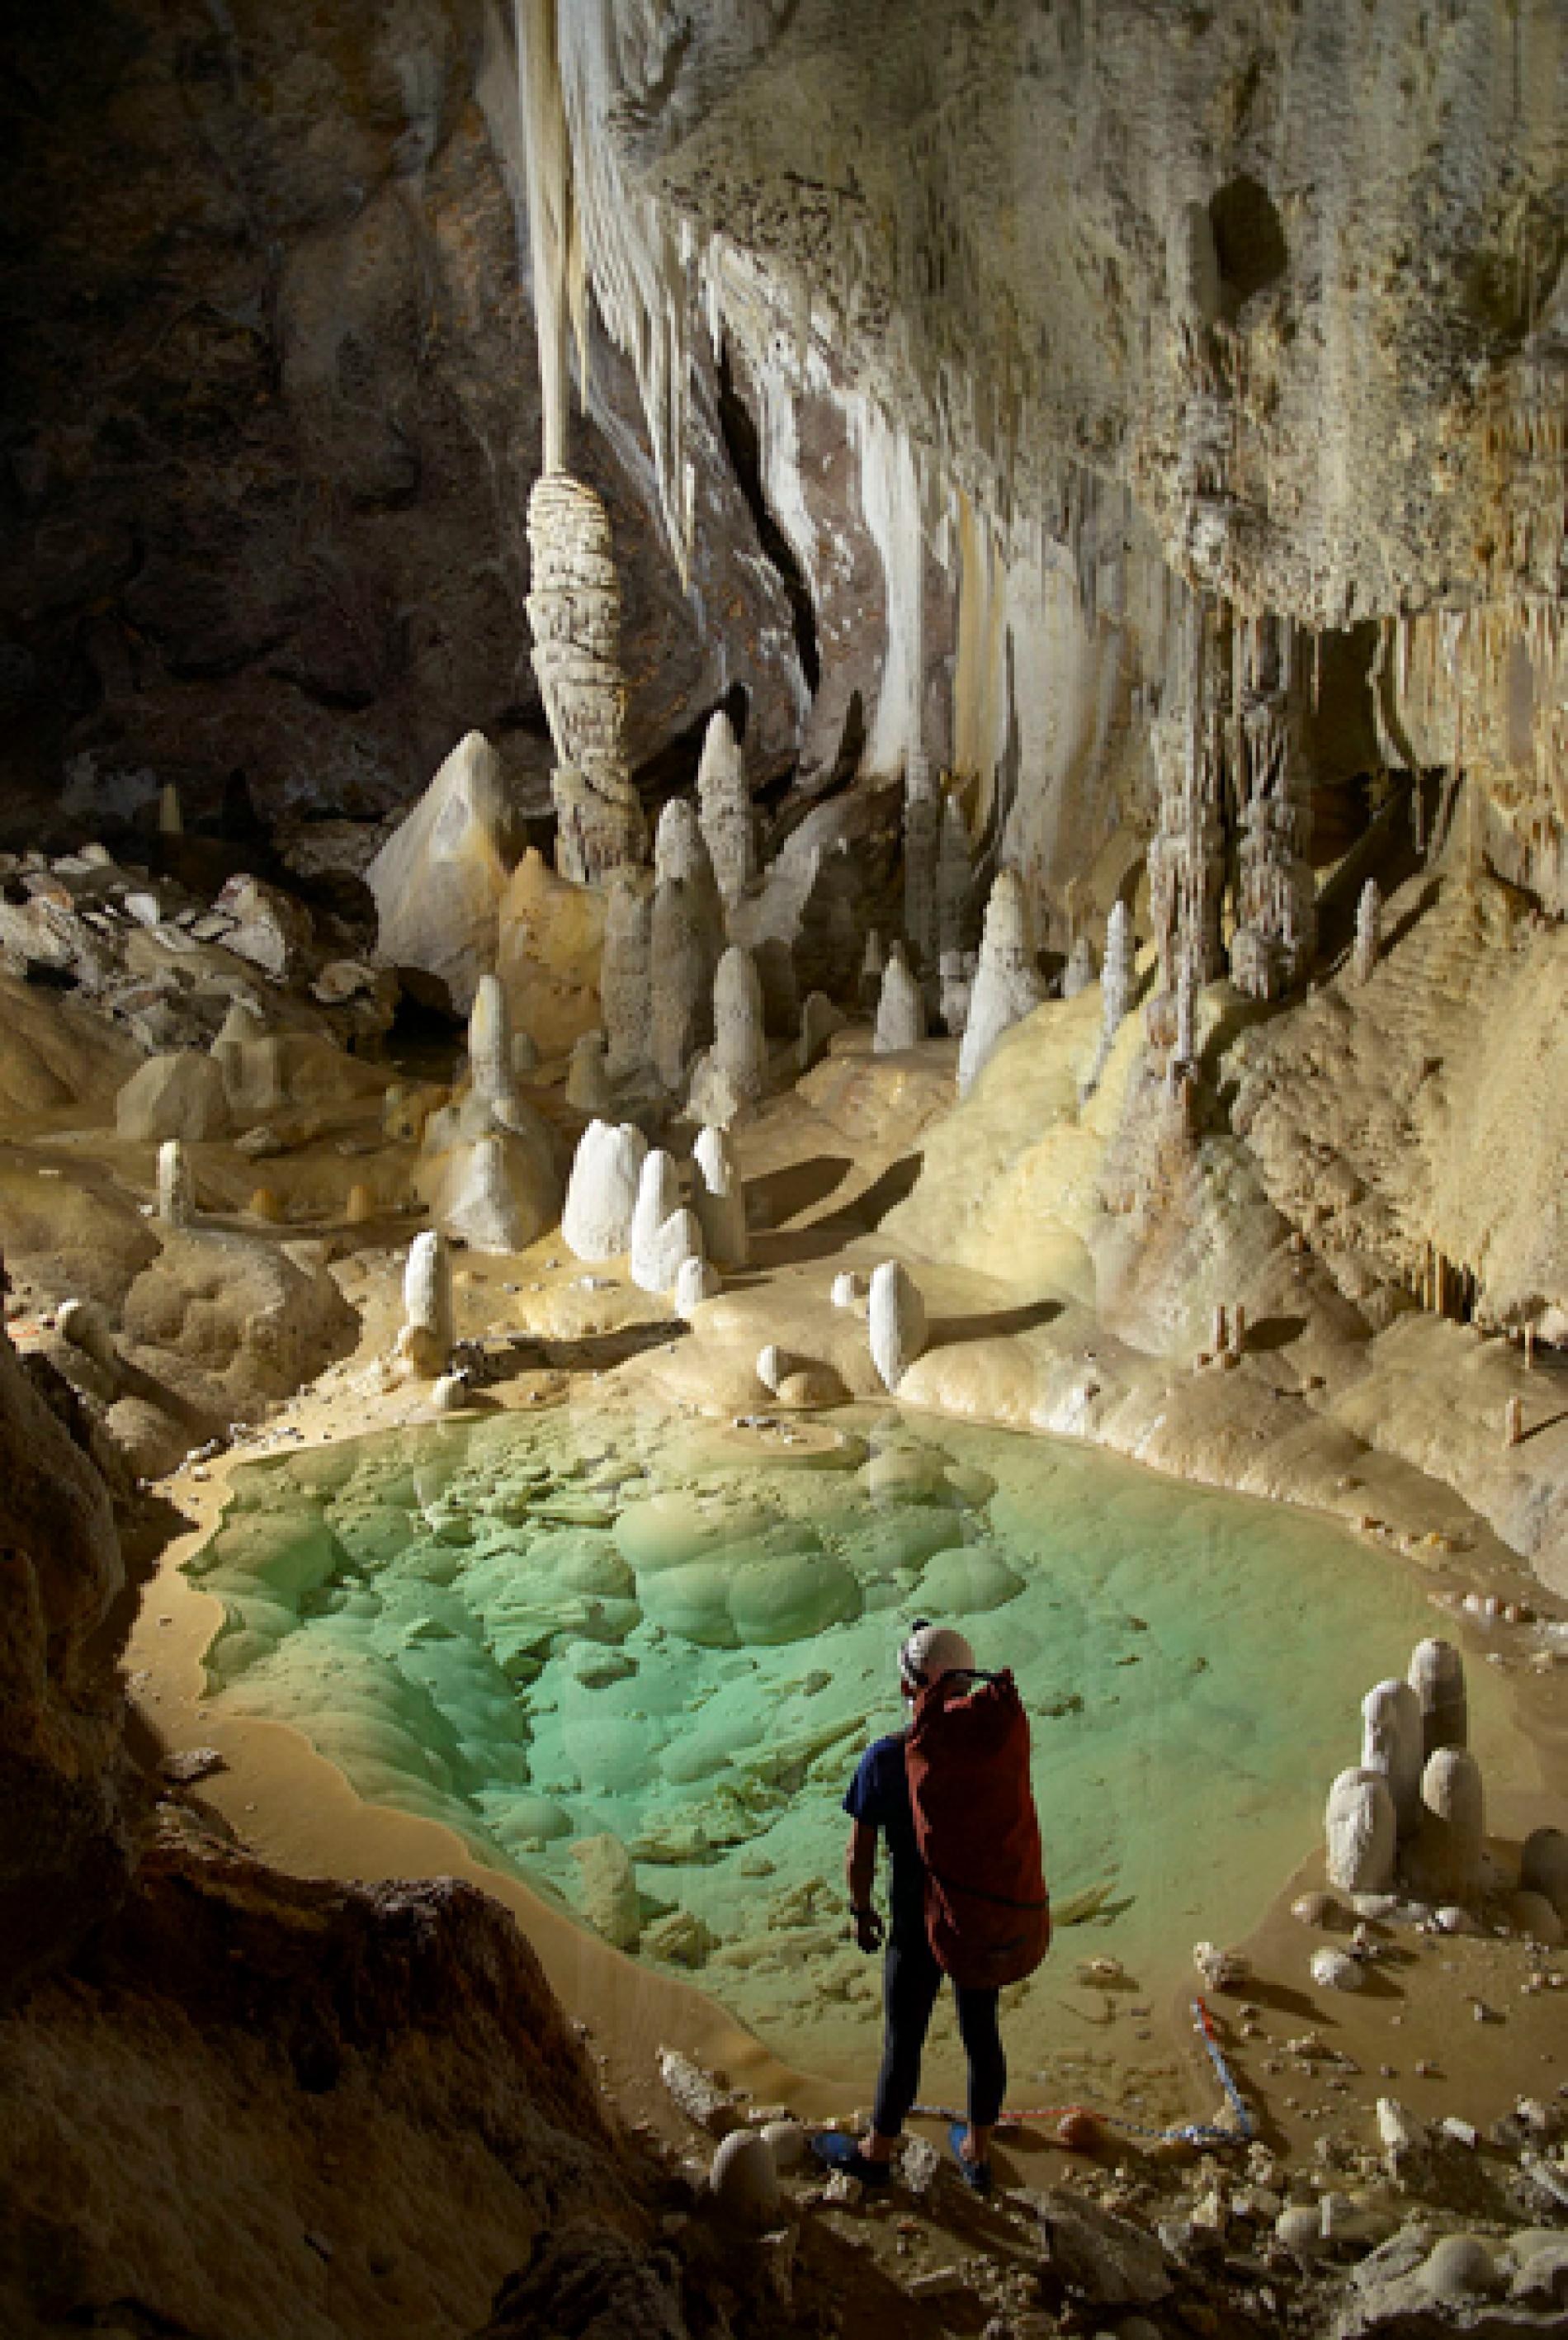 Drug-Resistant Bacteria Found in 4-Million-Year-Old Cave